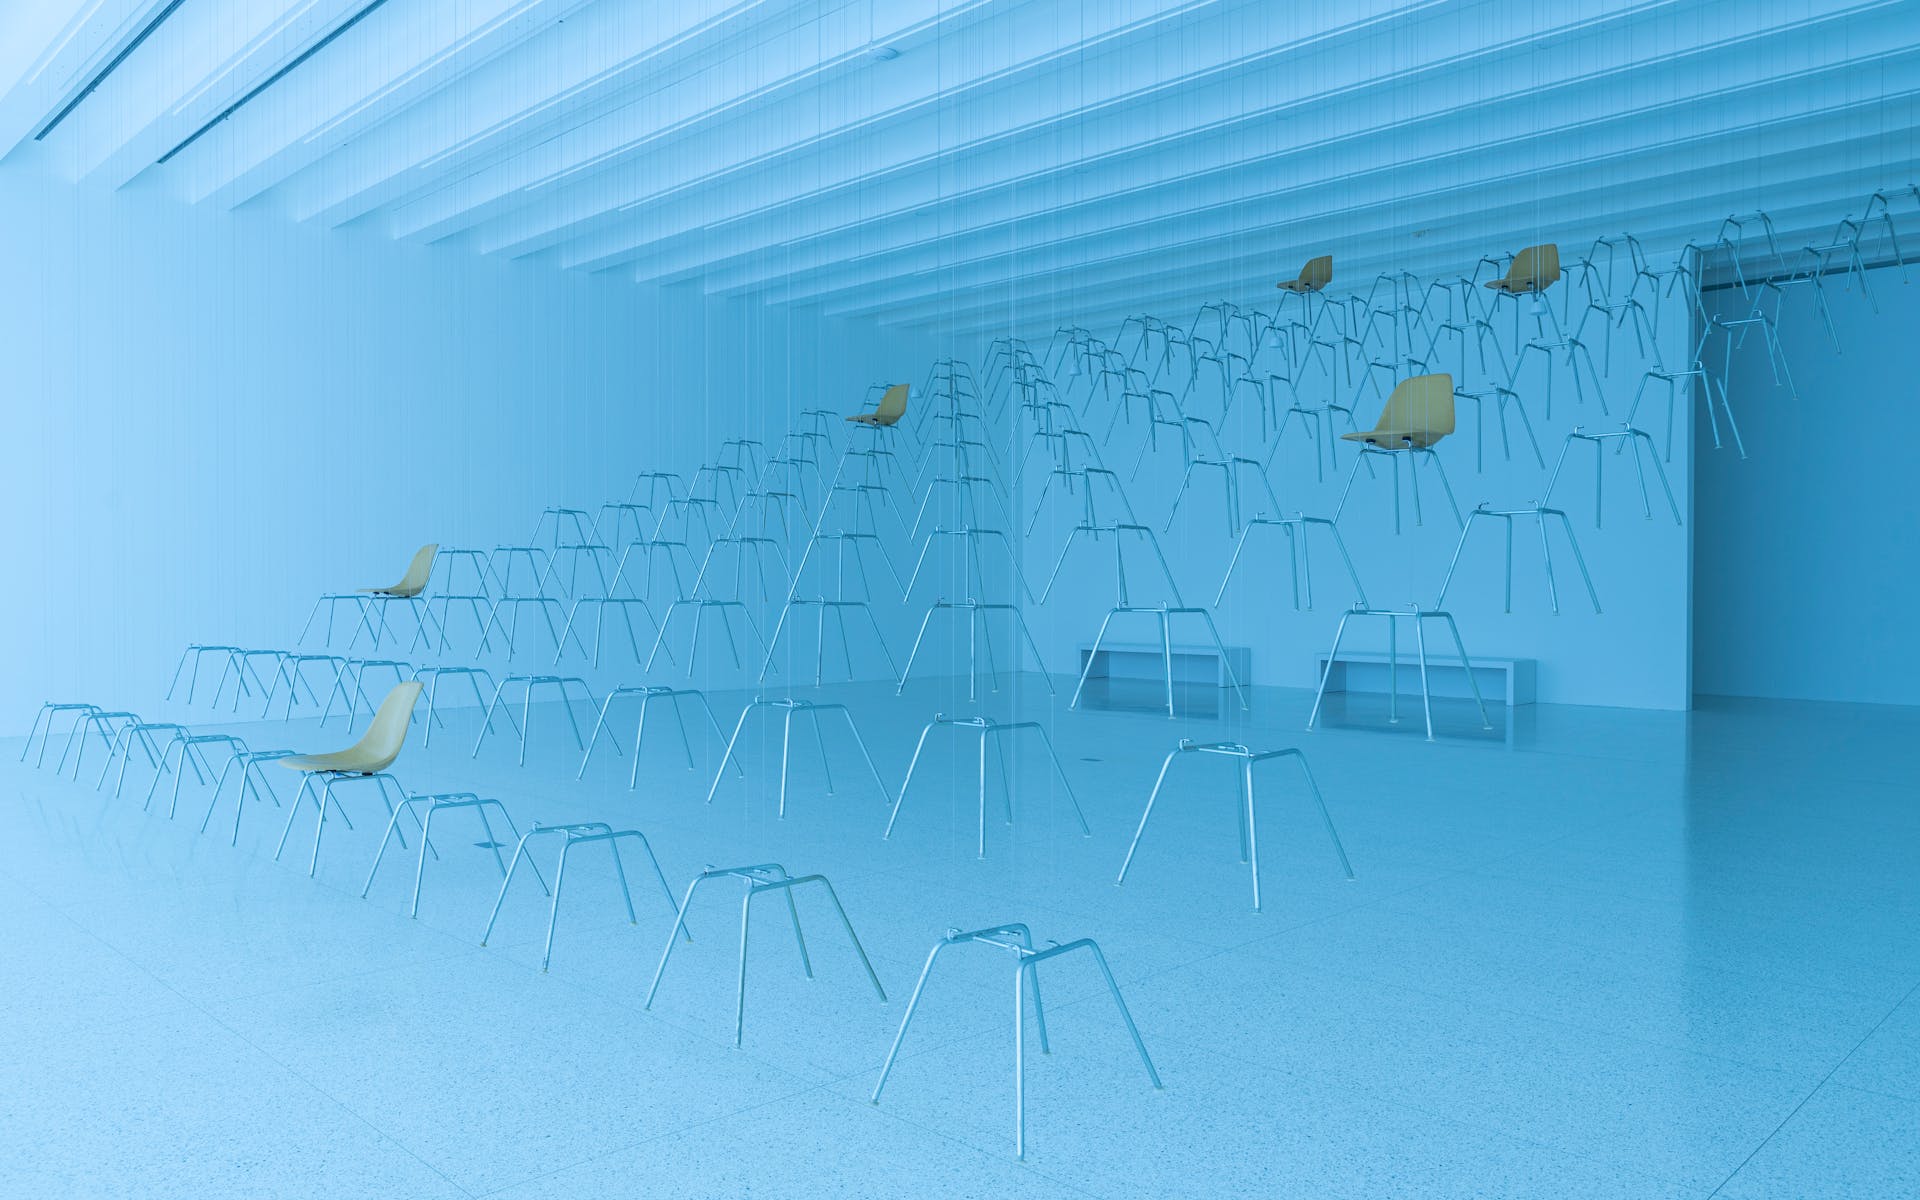 Gallery bathed in blue light with chairs and chair legs suspended from the ceiling